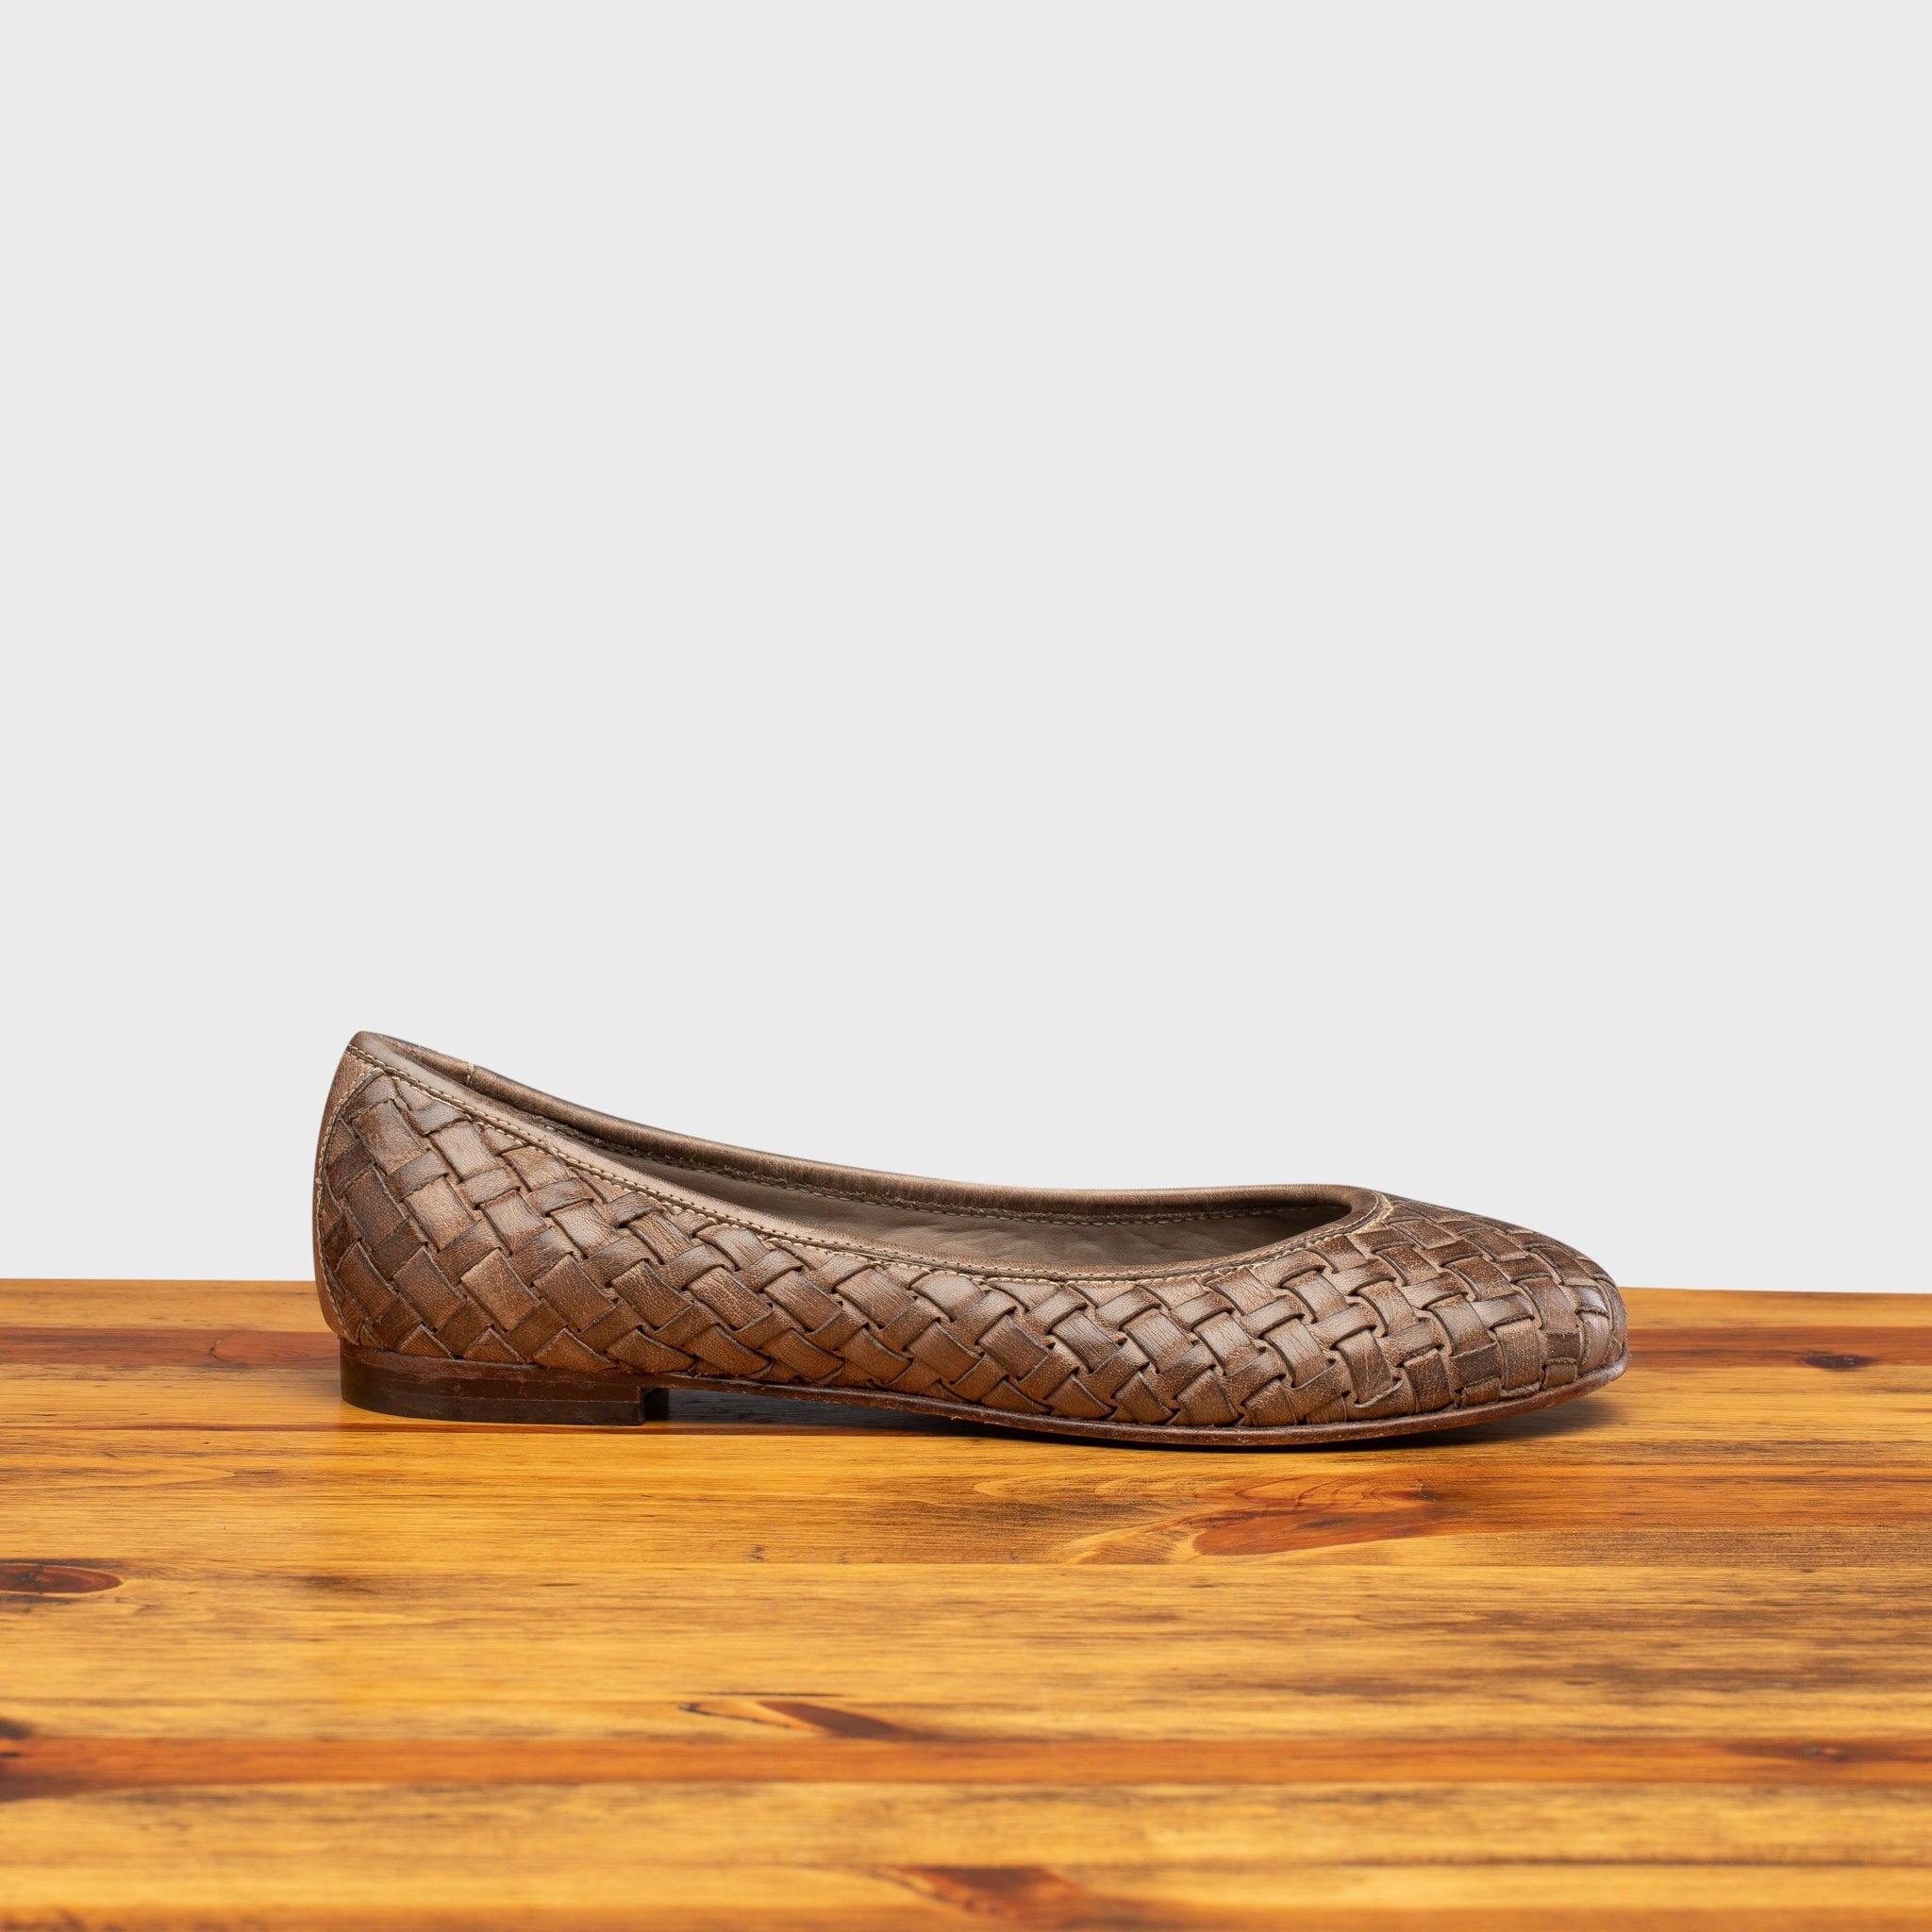 Side profile of B940 Calzoleria Toscana Taupe Woven Melania Ballerina on top of a wooden table